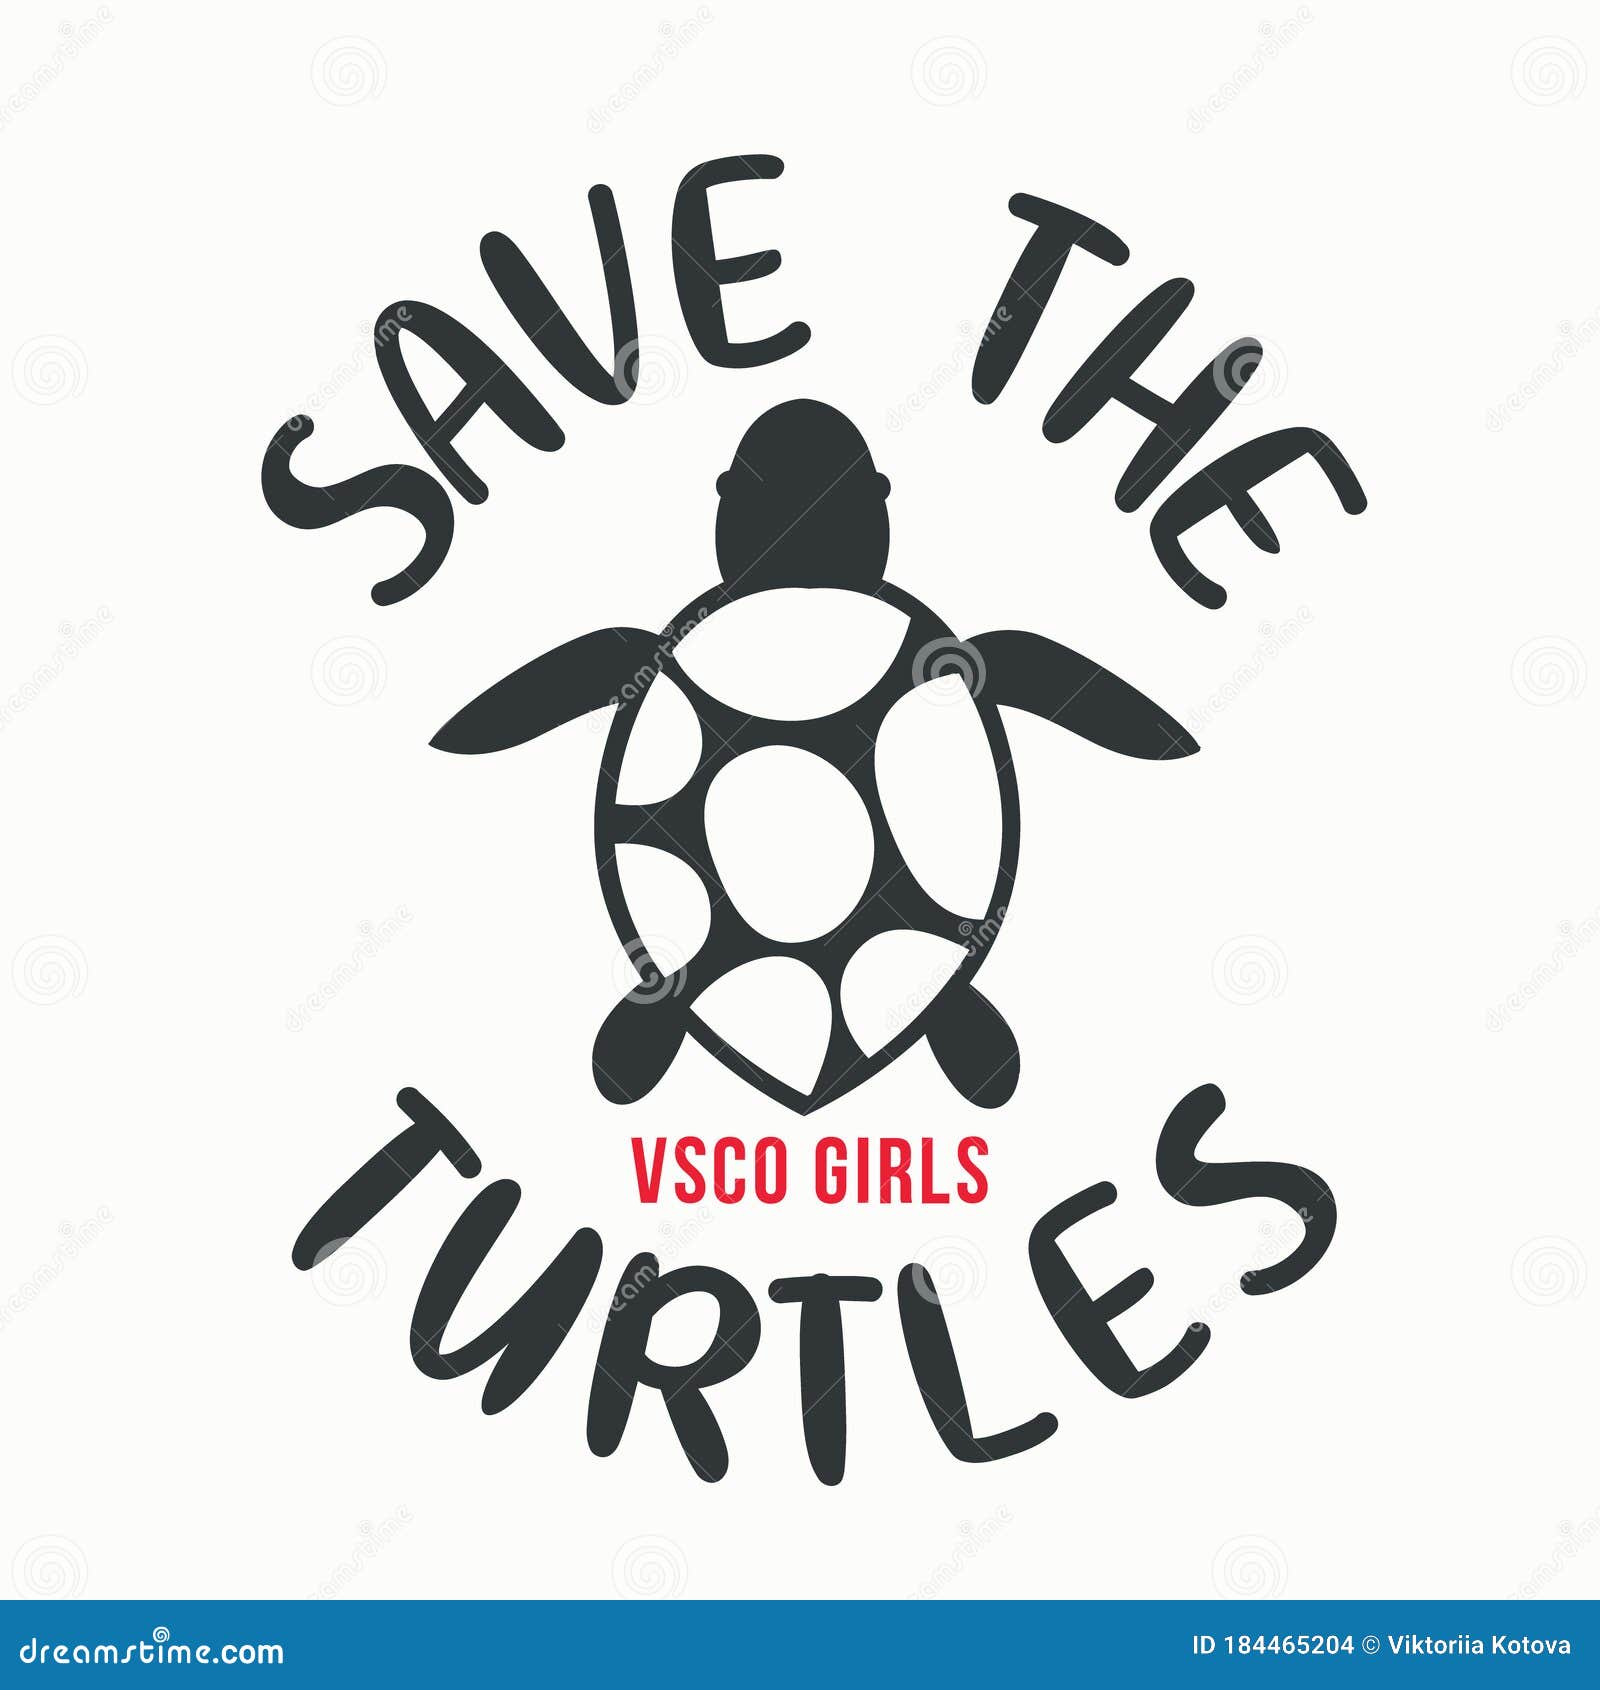 save the turtles. trendy shirt  for vsco girls. ecology concept  